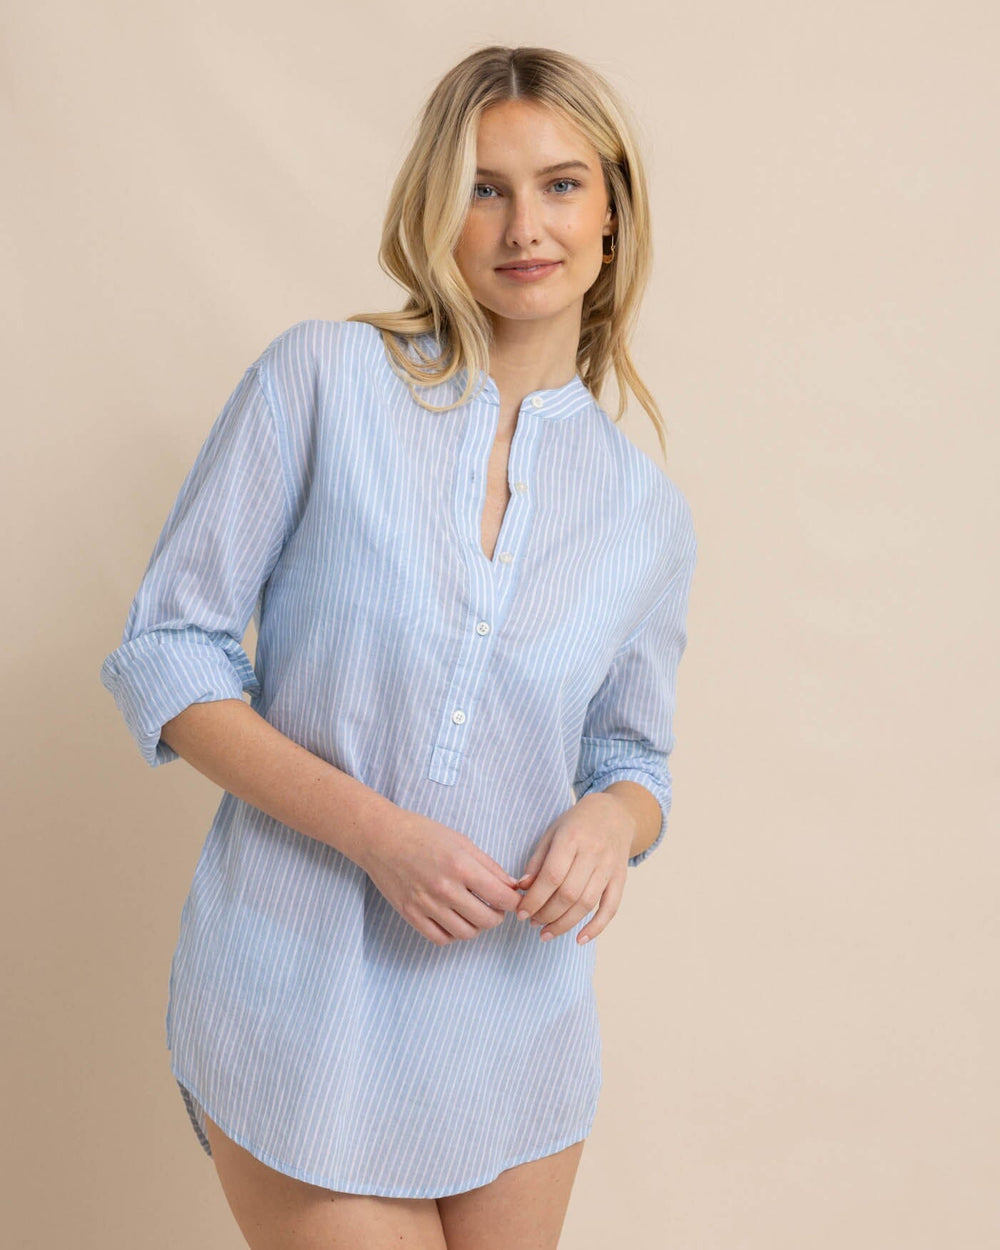 The front view of the Southern Tide Wrenley Airy Cotton Tunic by Southern Tide - Clearwater Blue